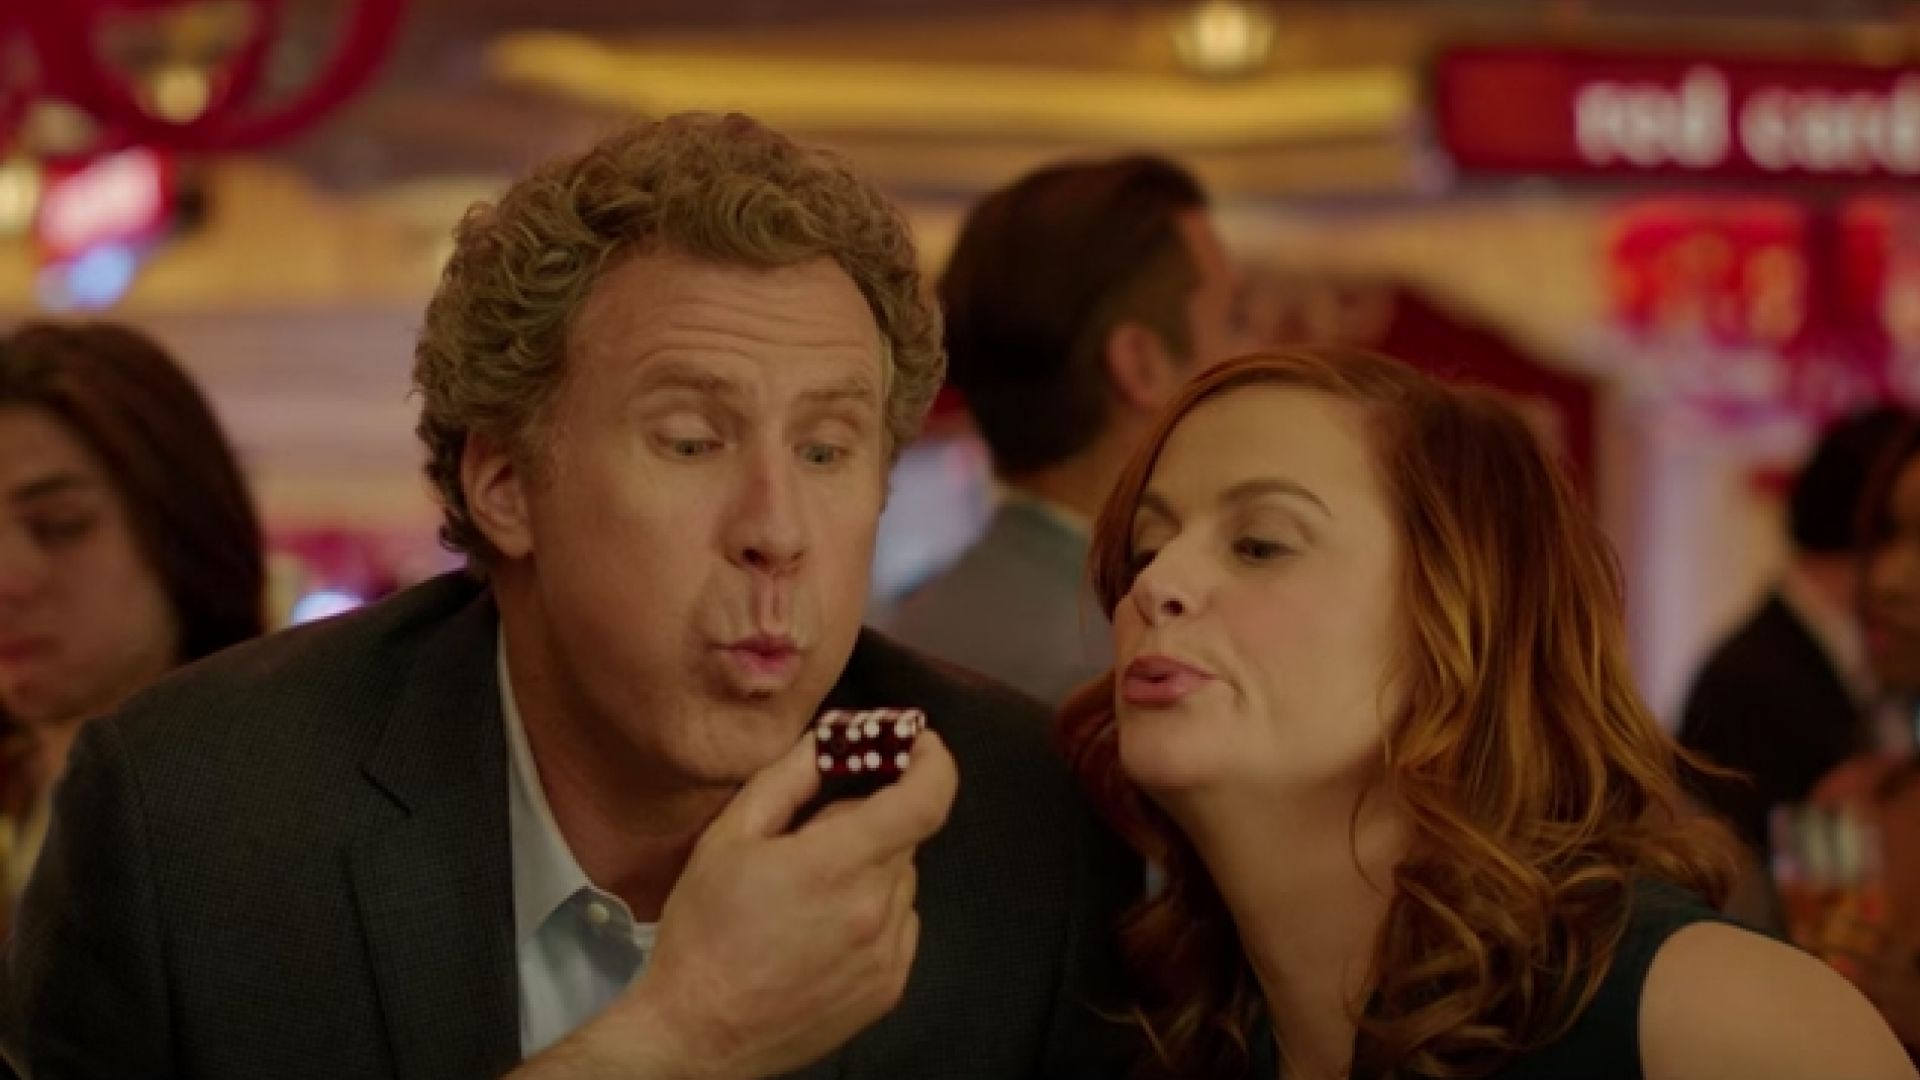 &quot;The House&quot; movie trailer. The comedy  stars Will Ferrell an